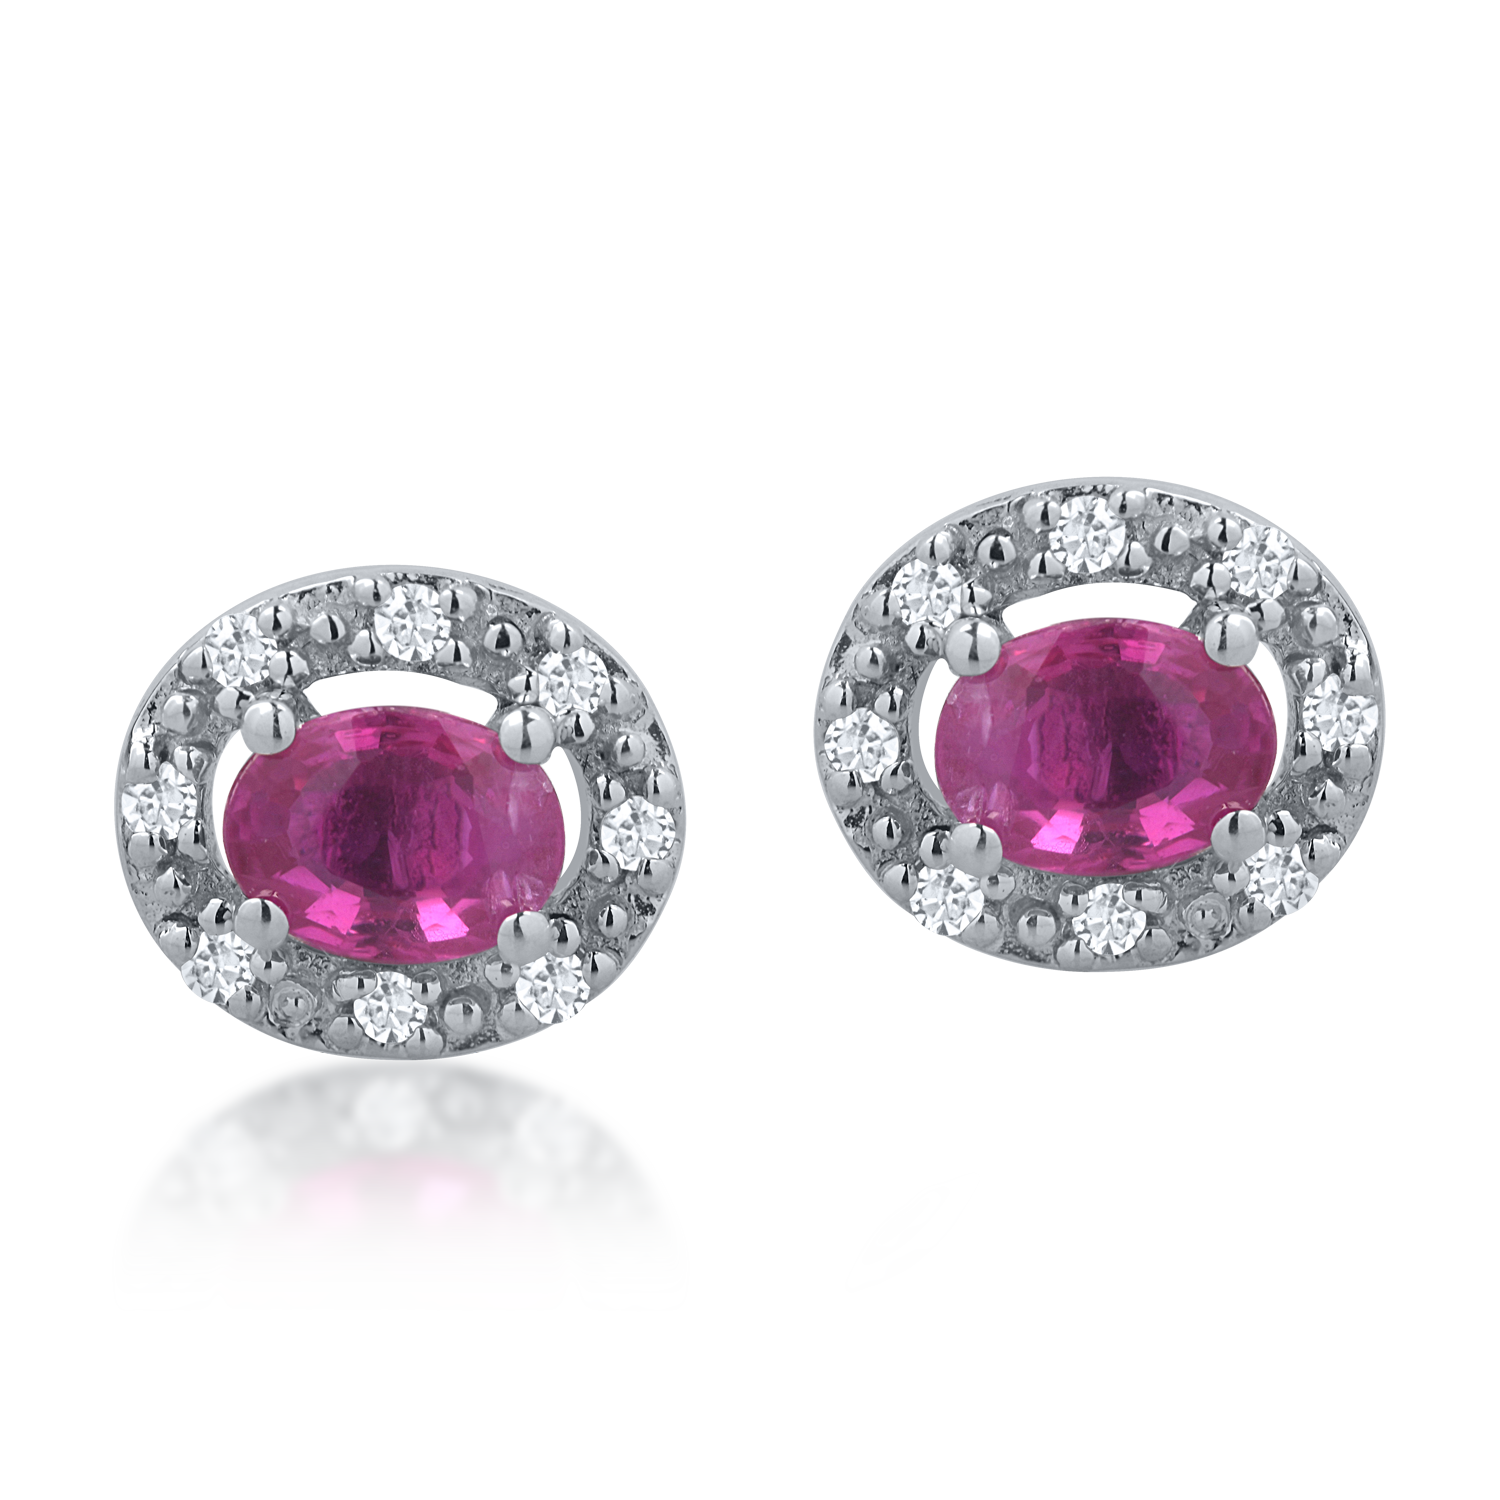 White gold earrings with 0.49ct rubies and 0.07ct diamonds